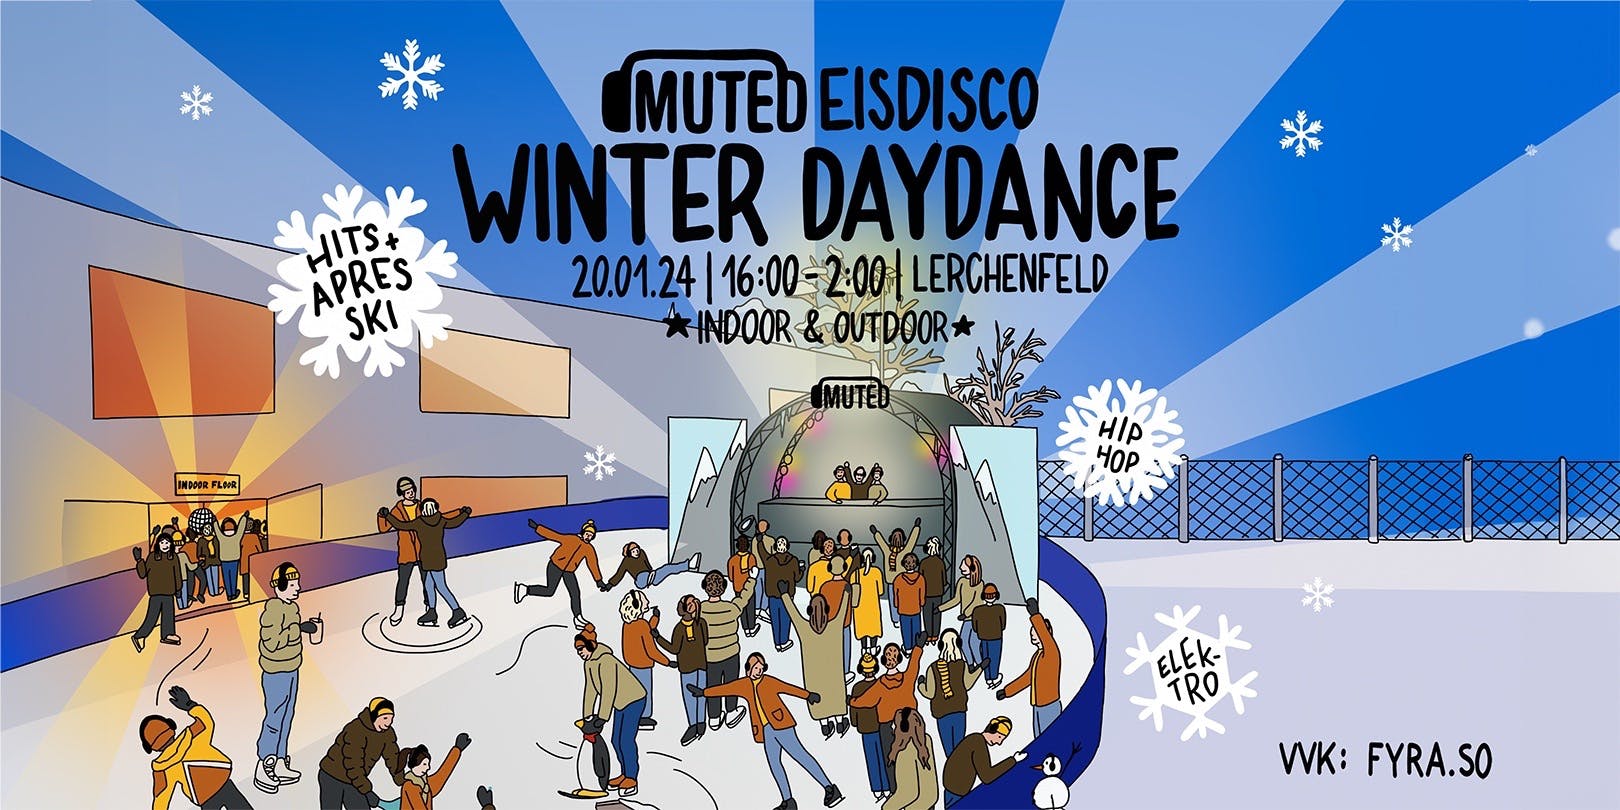 MUTED EIS DISCO - Winter Day Dance 